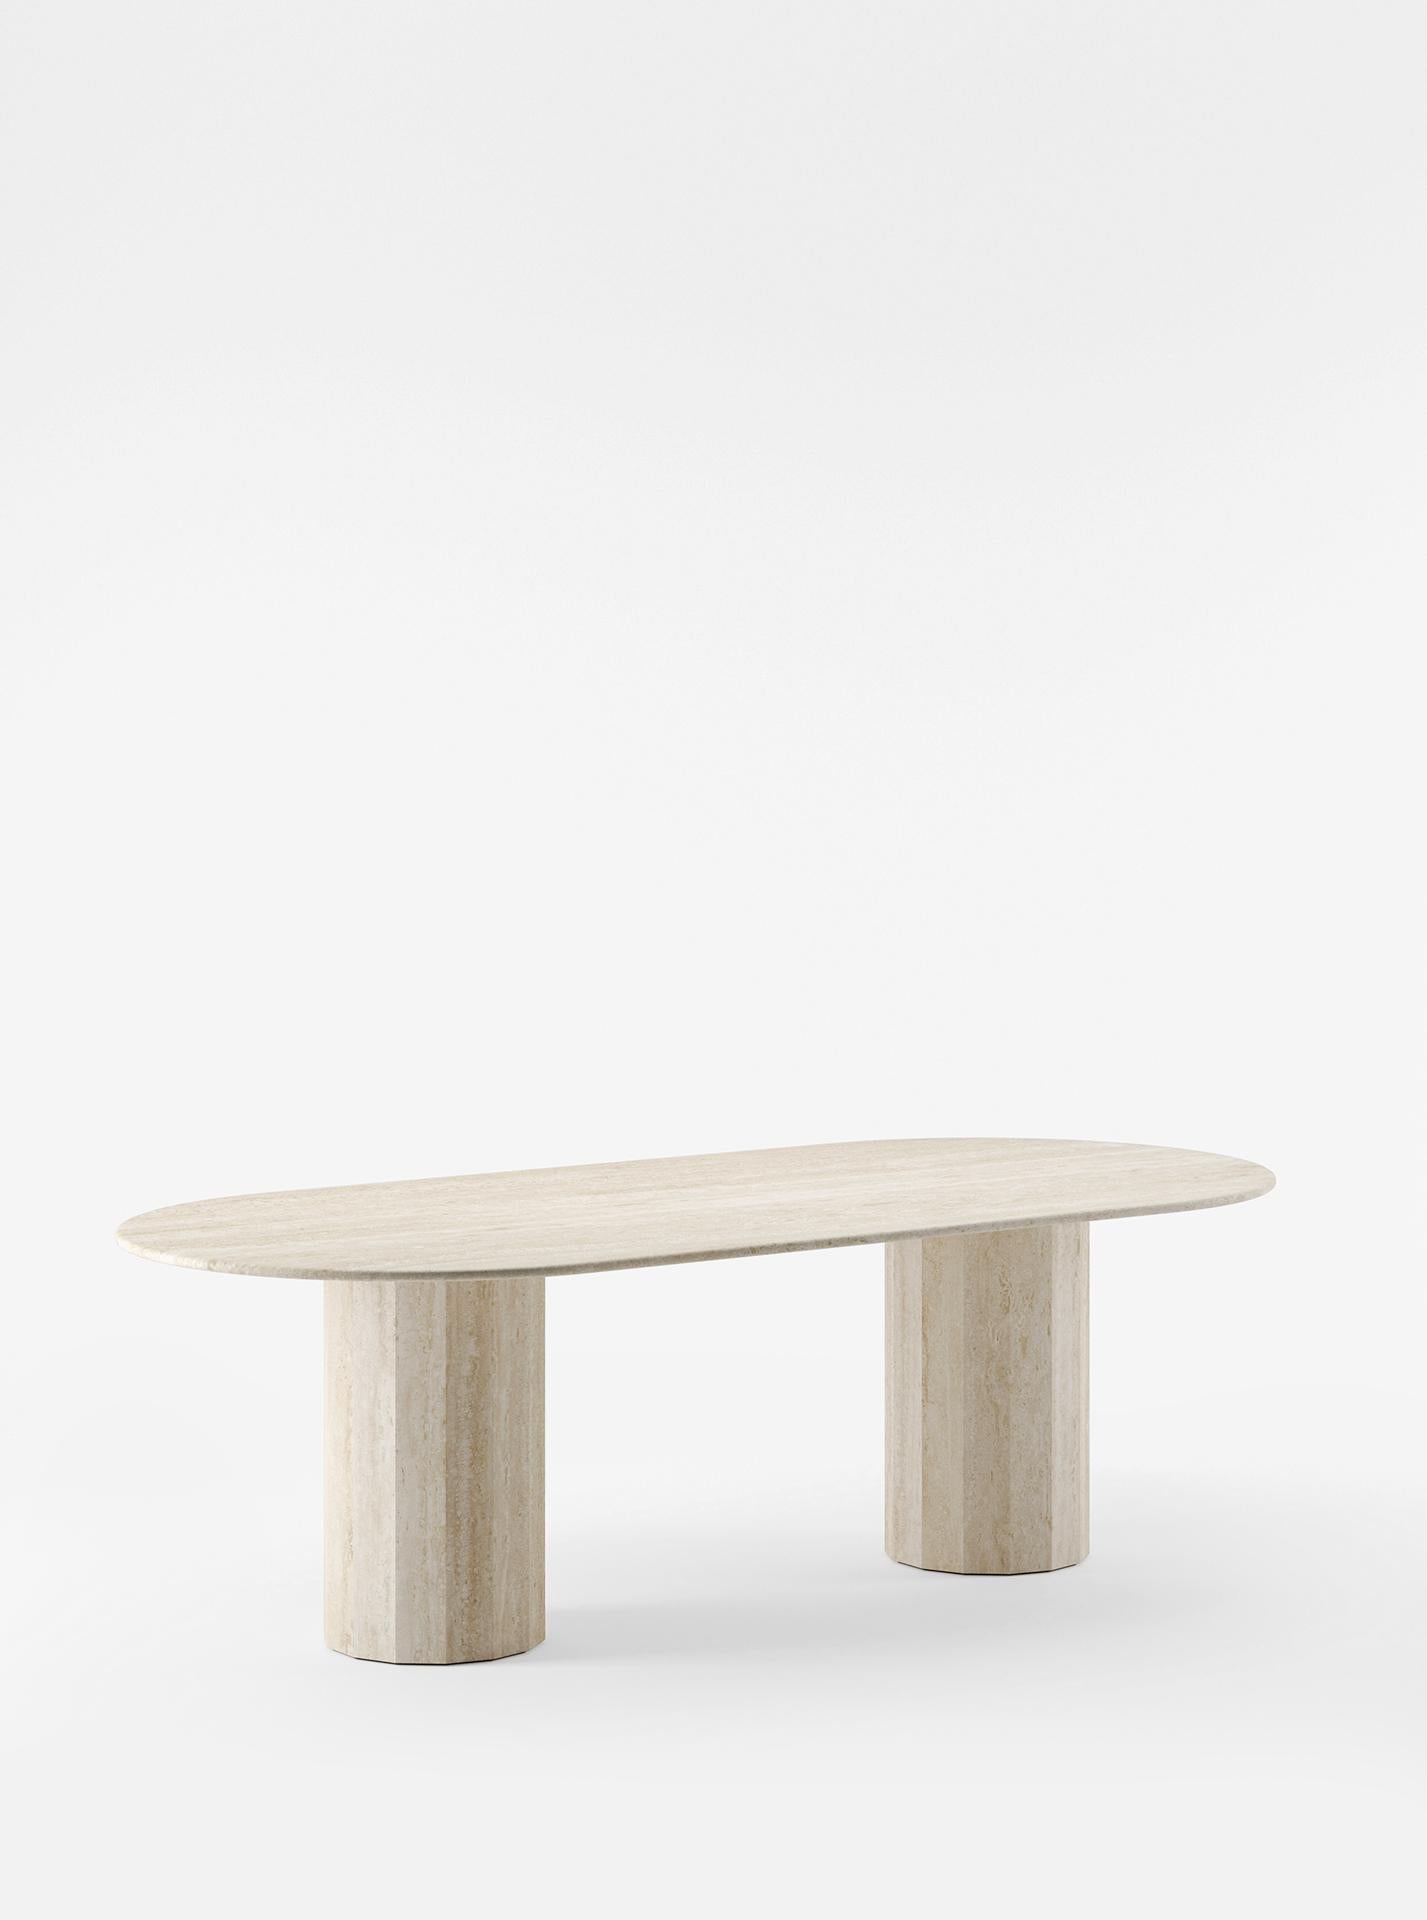 Ashby Oval Dining Table in Honed Travertine 1